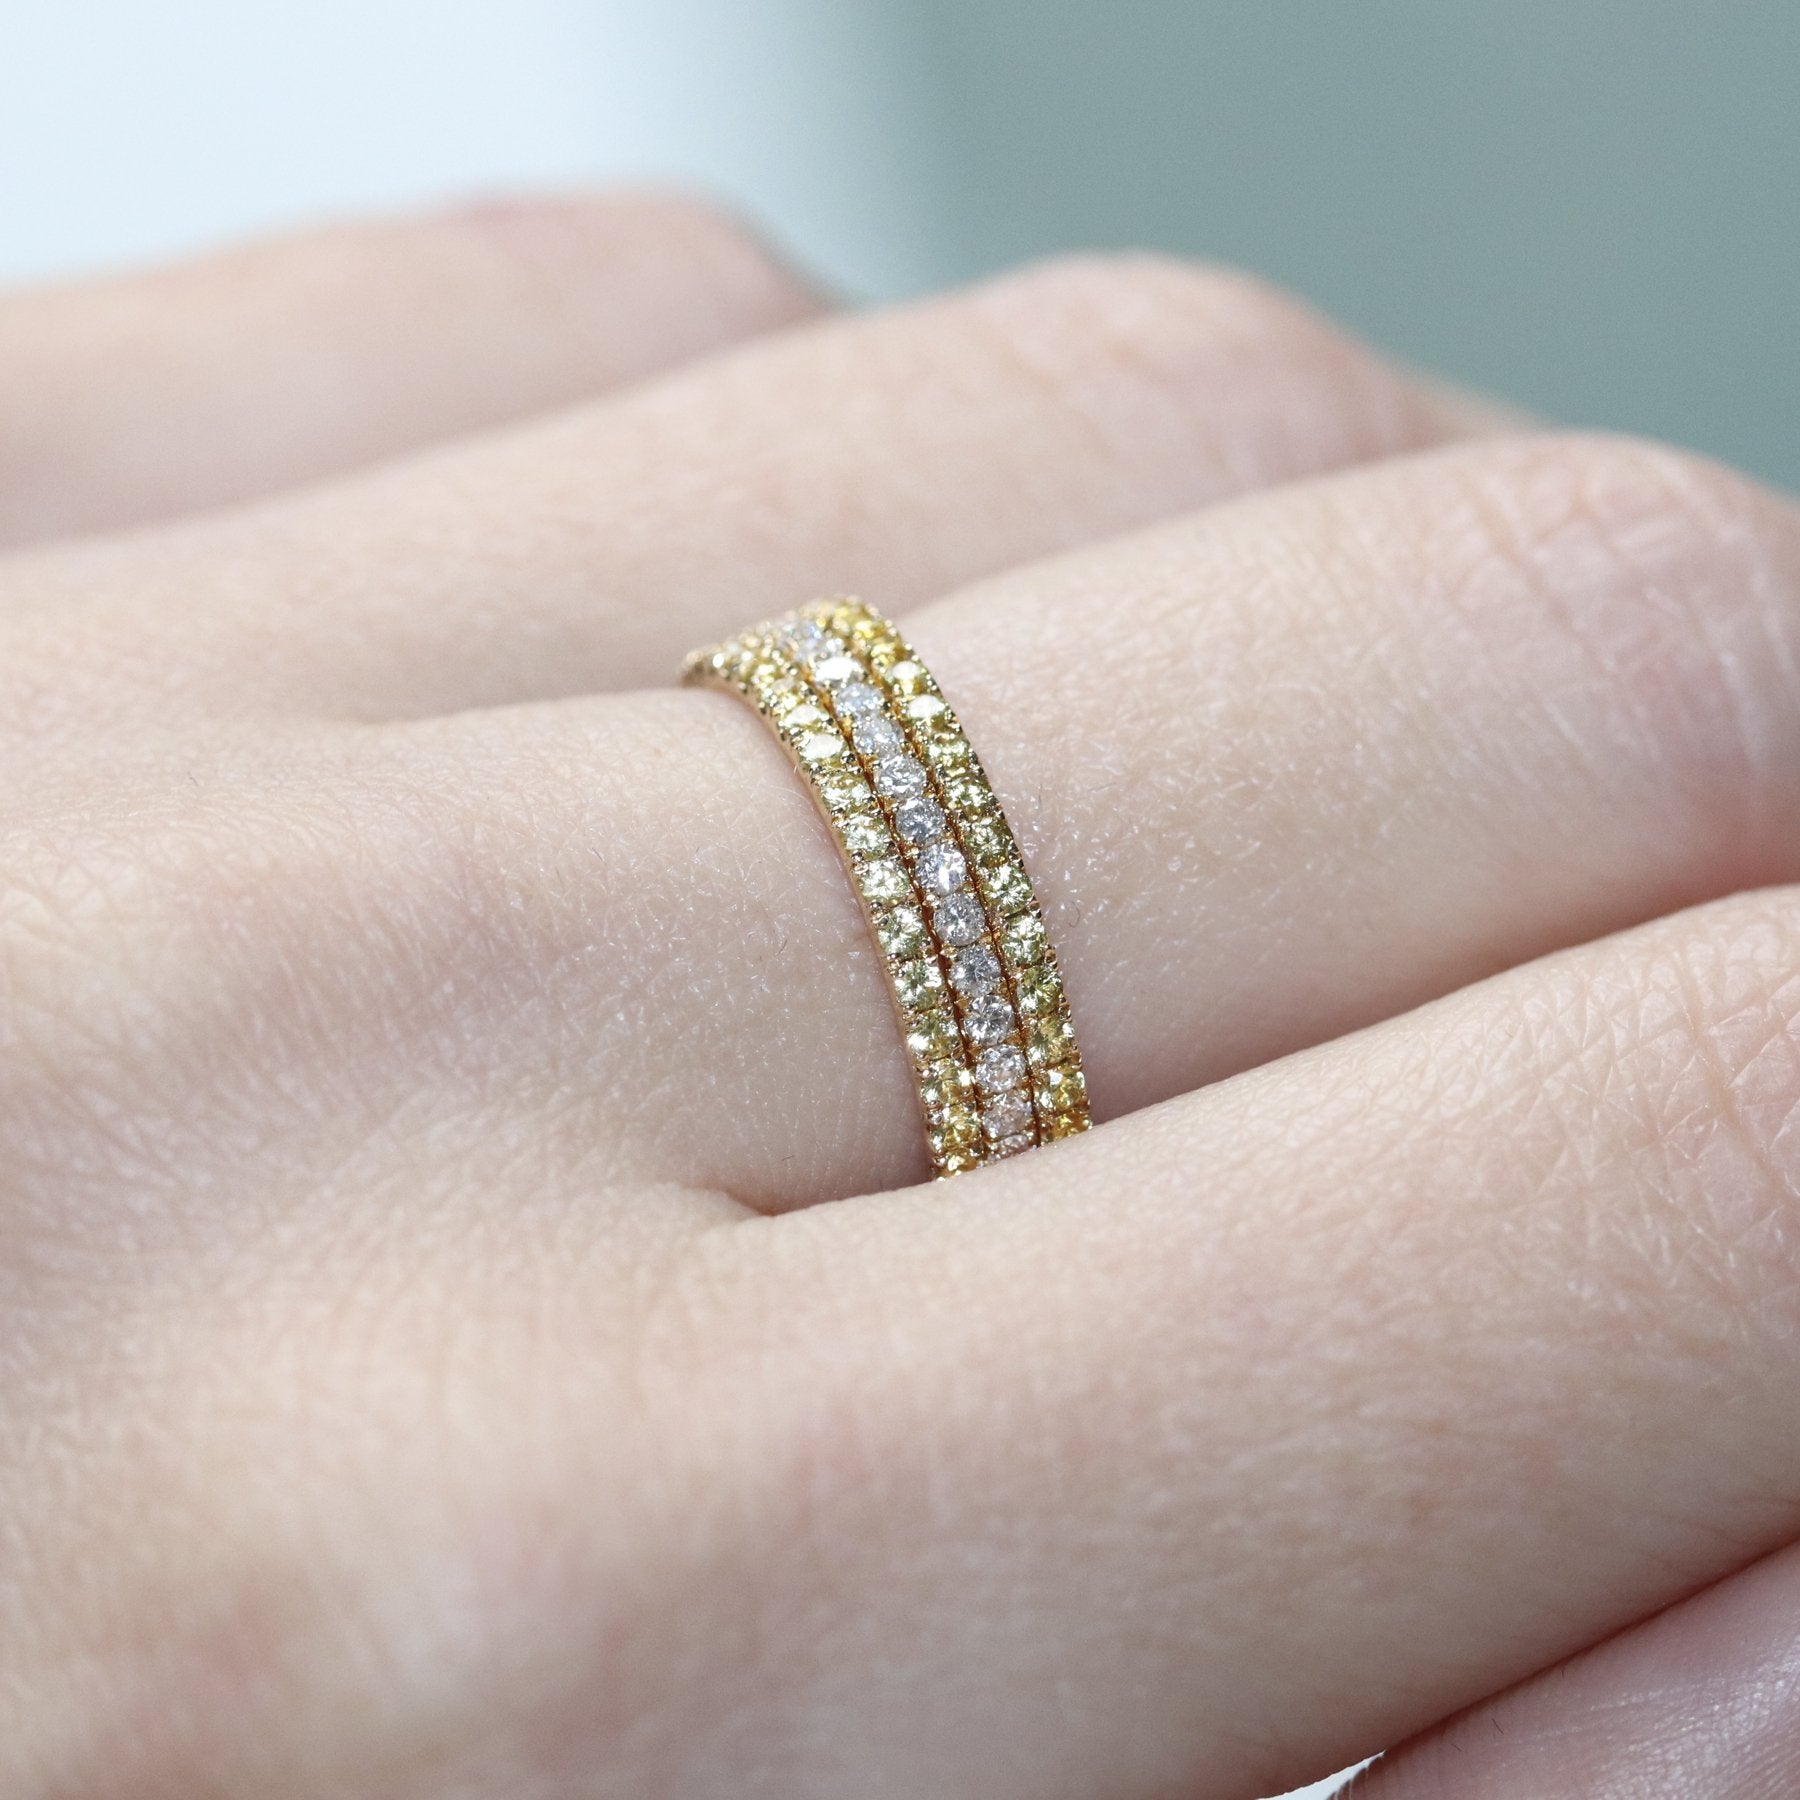 Voile D'or eternity ring stack 18ct yellow gold